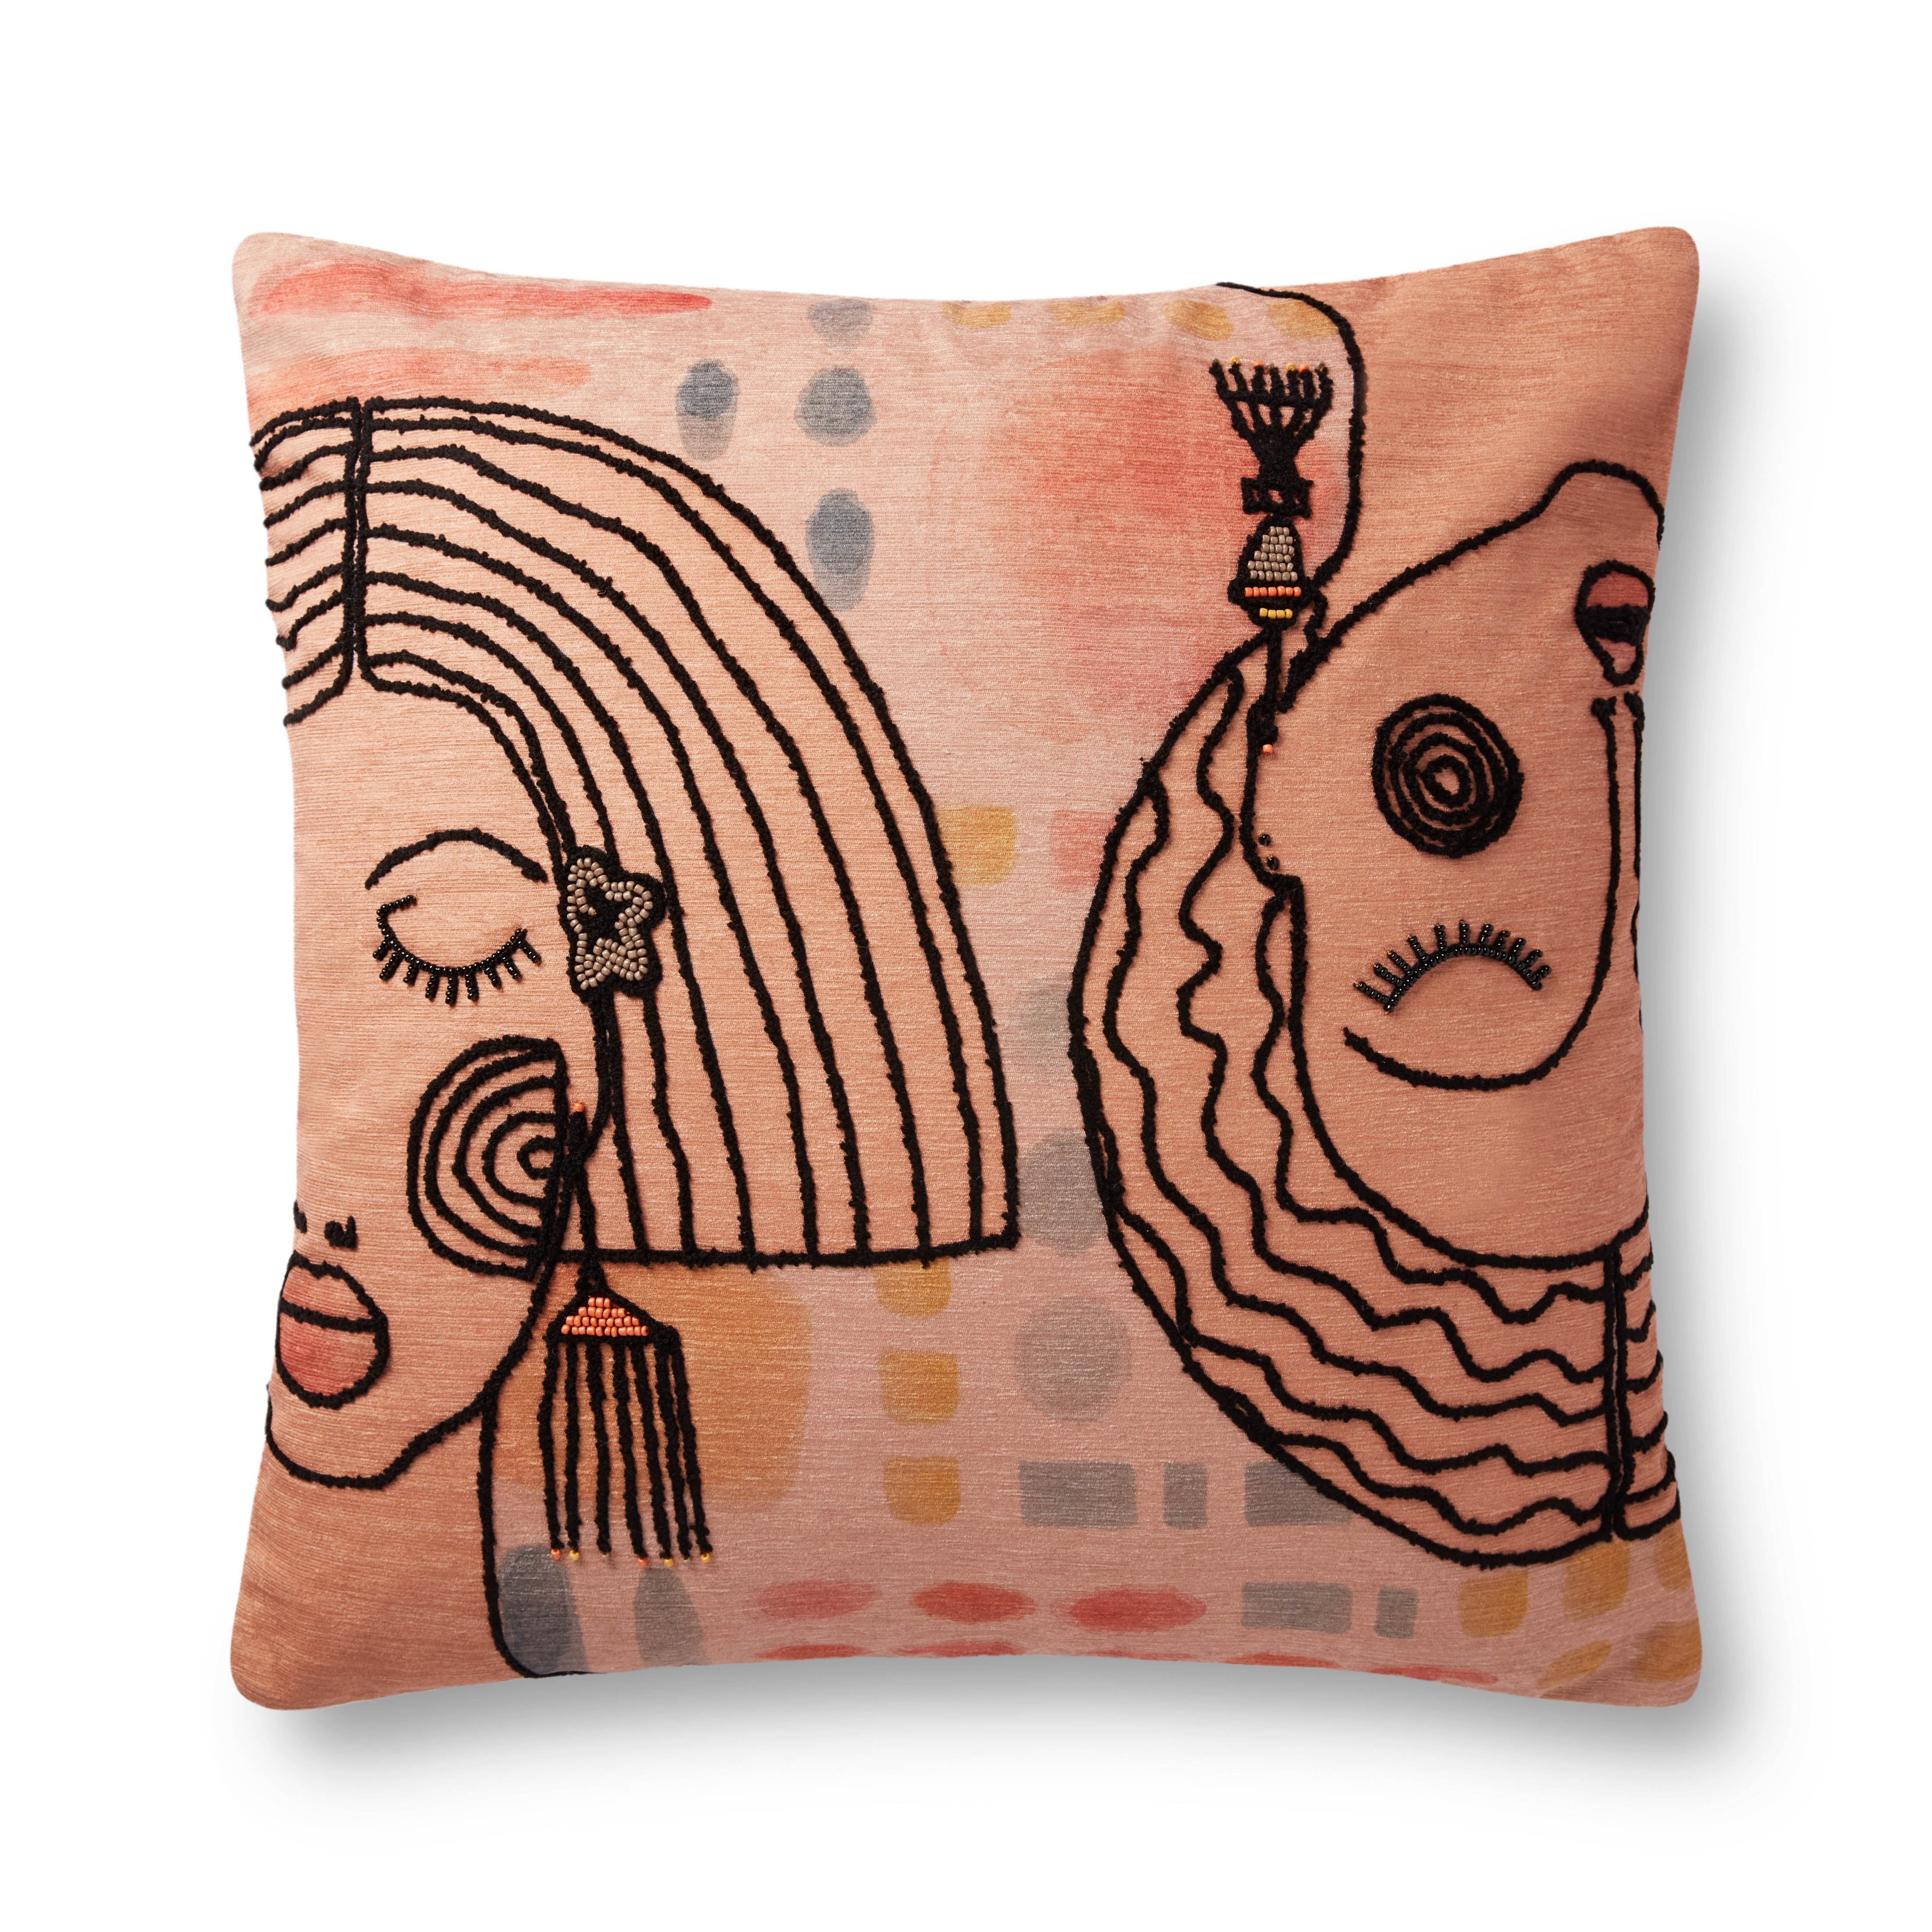 PILLOWS P0953 TERRACOTTA / MULTI 22" x 22" Cover Only - Image 0